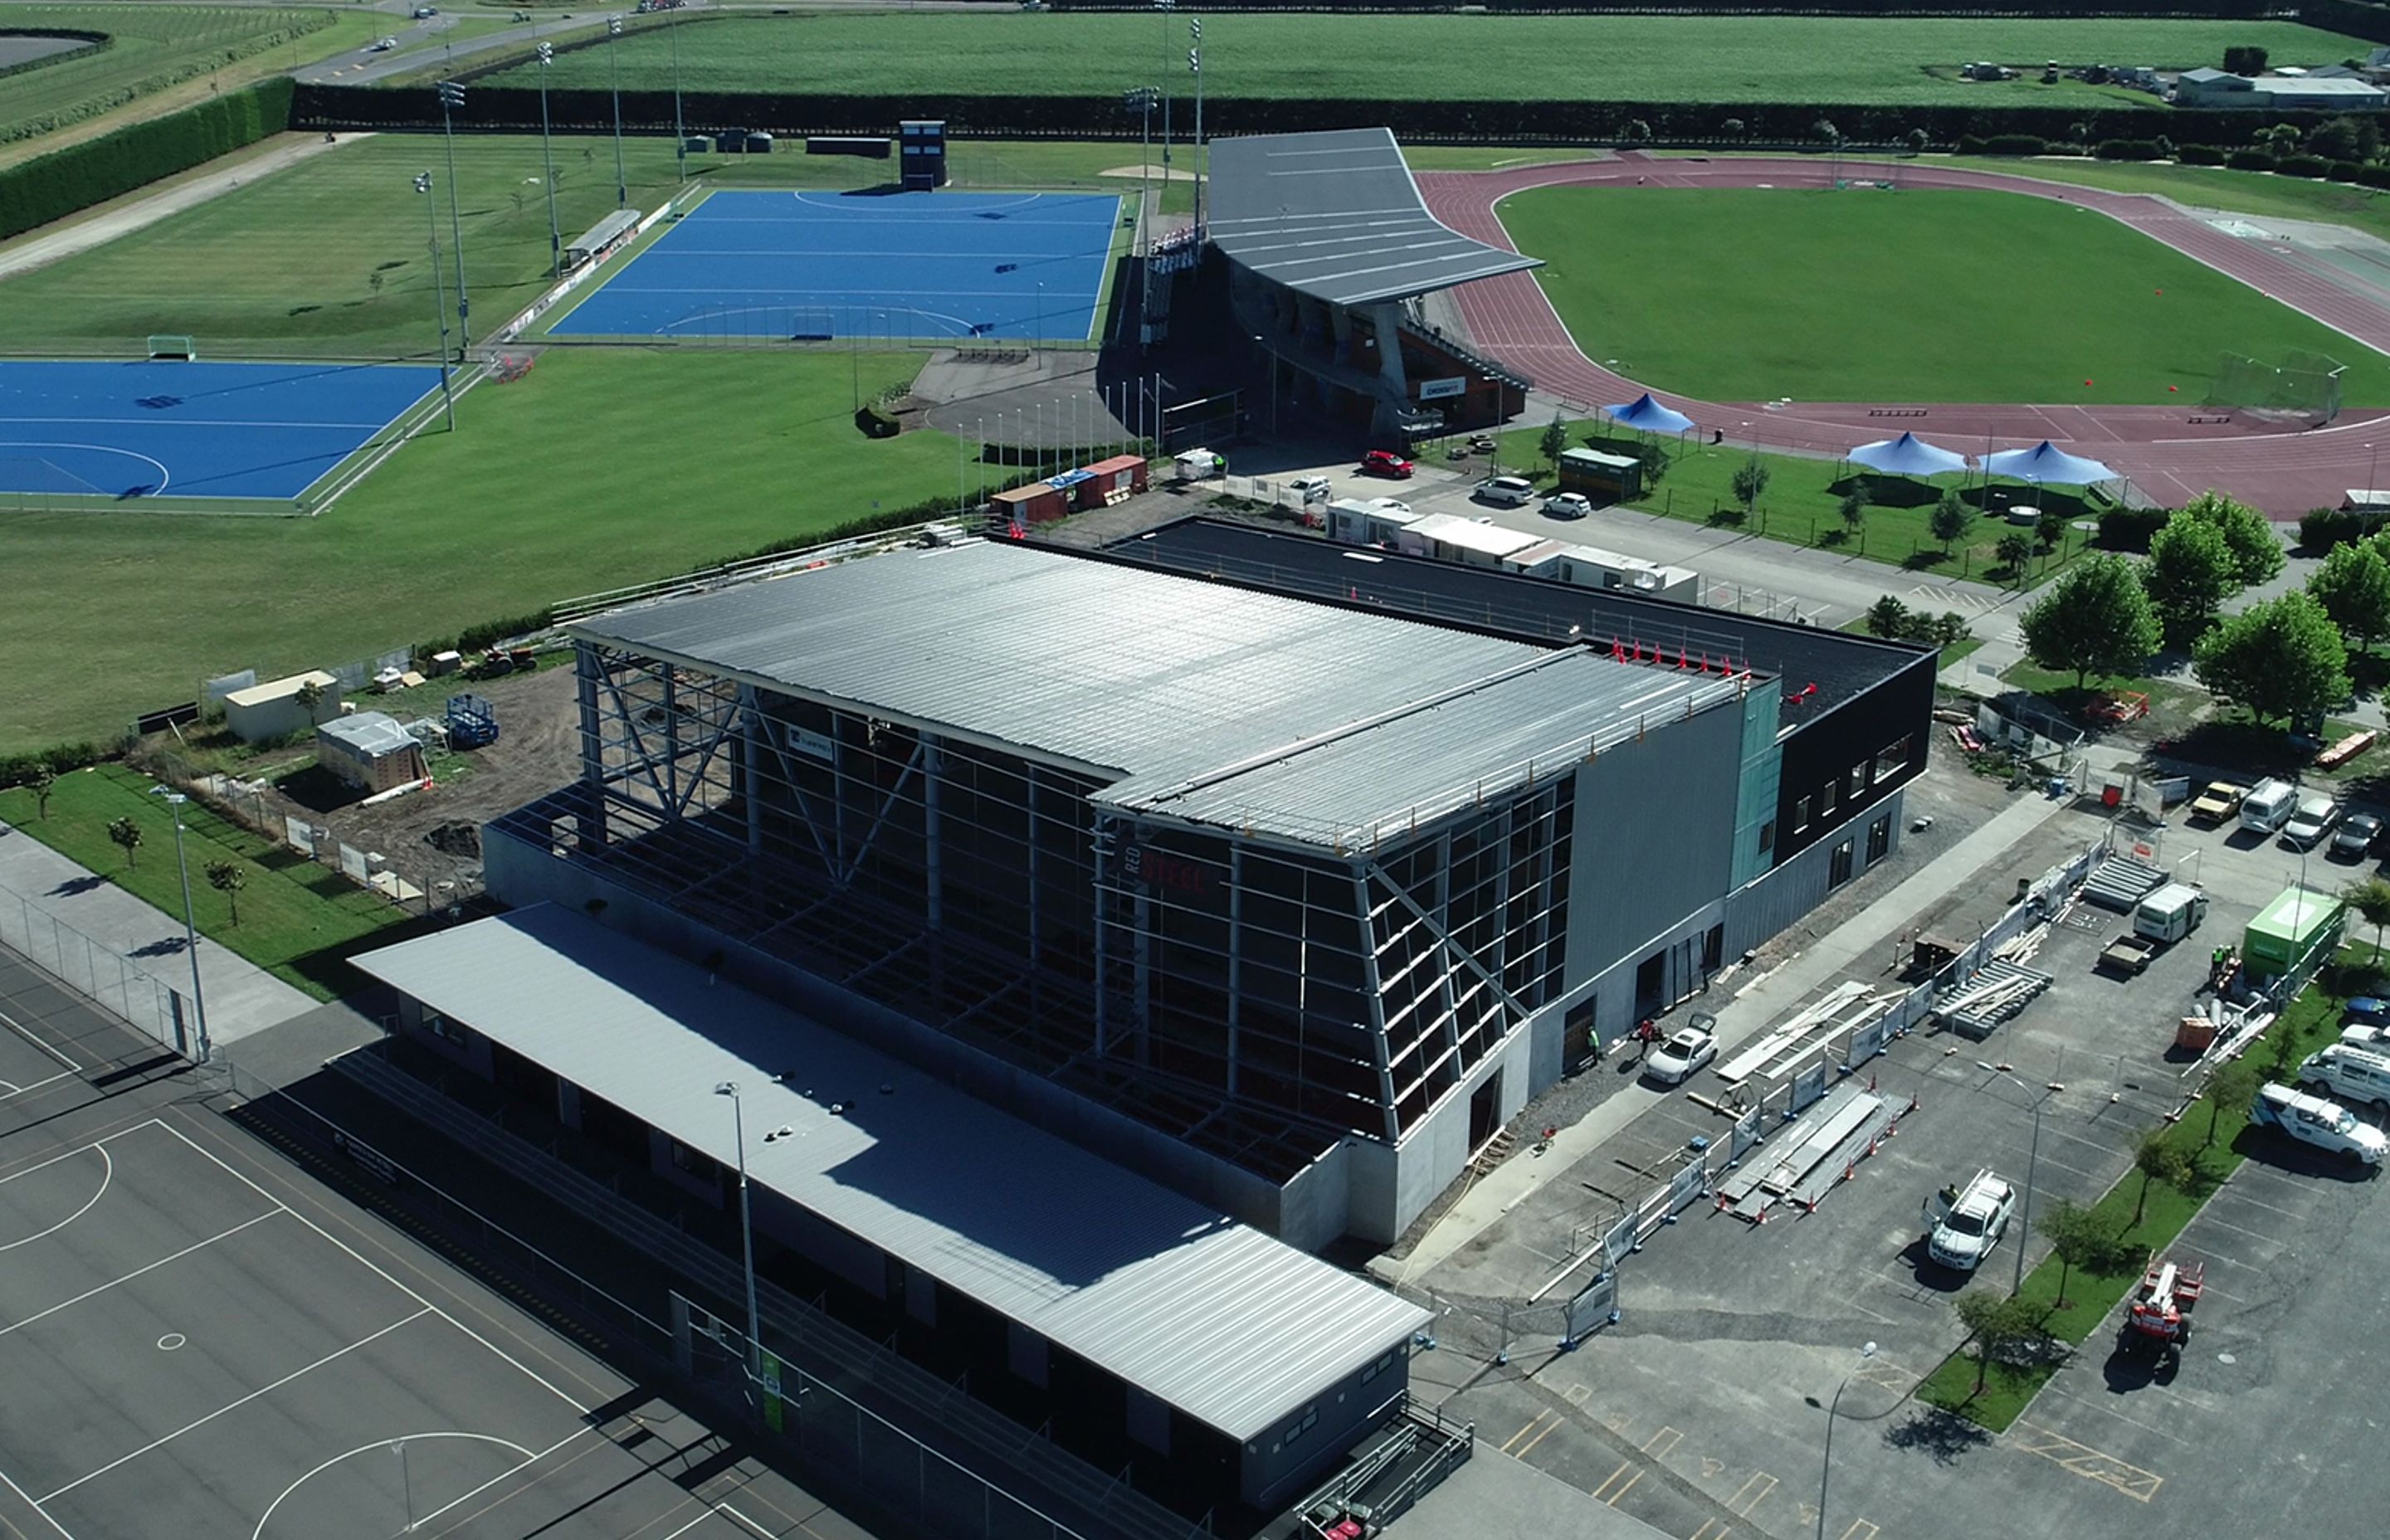 The Hawke's Bay Regional Sports Park with it's newly laid Tricore roof.